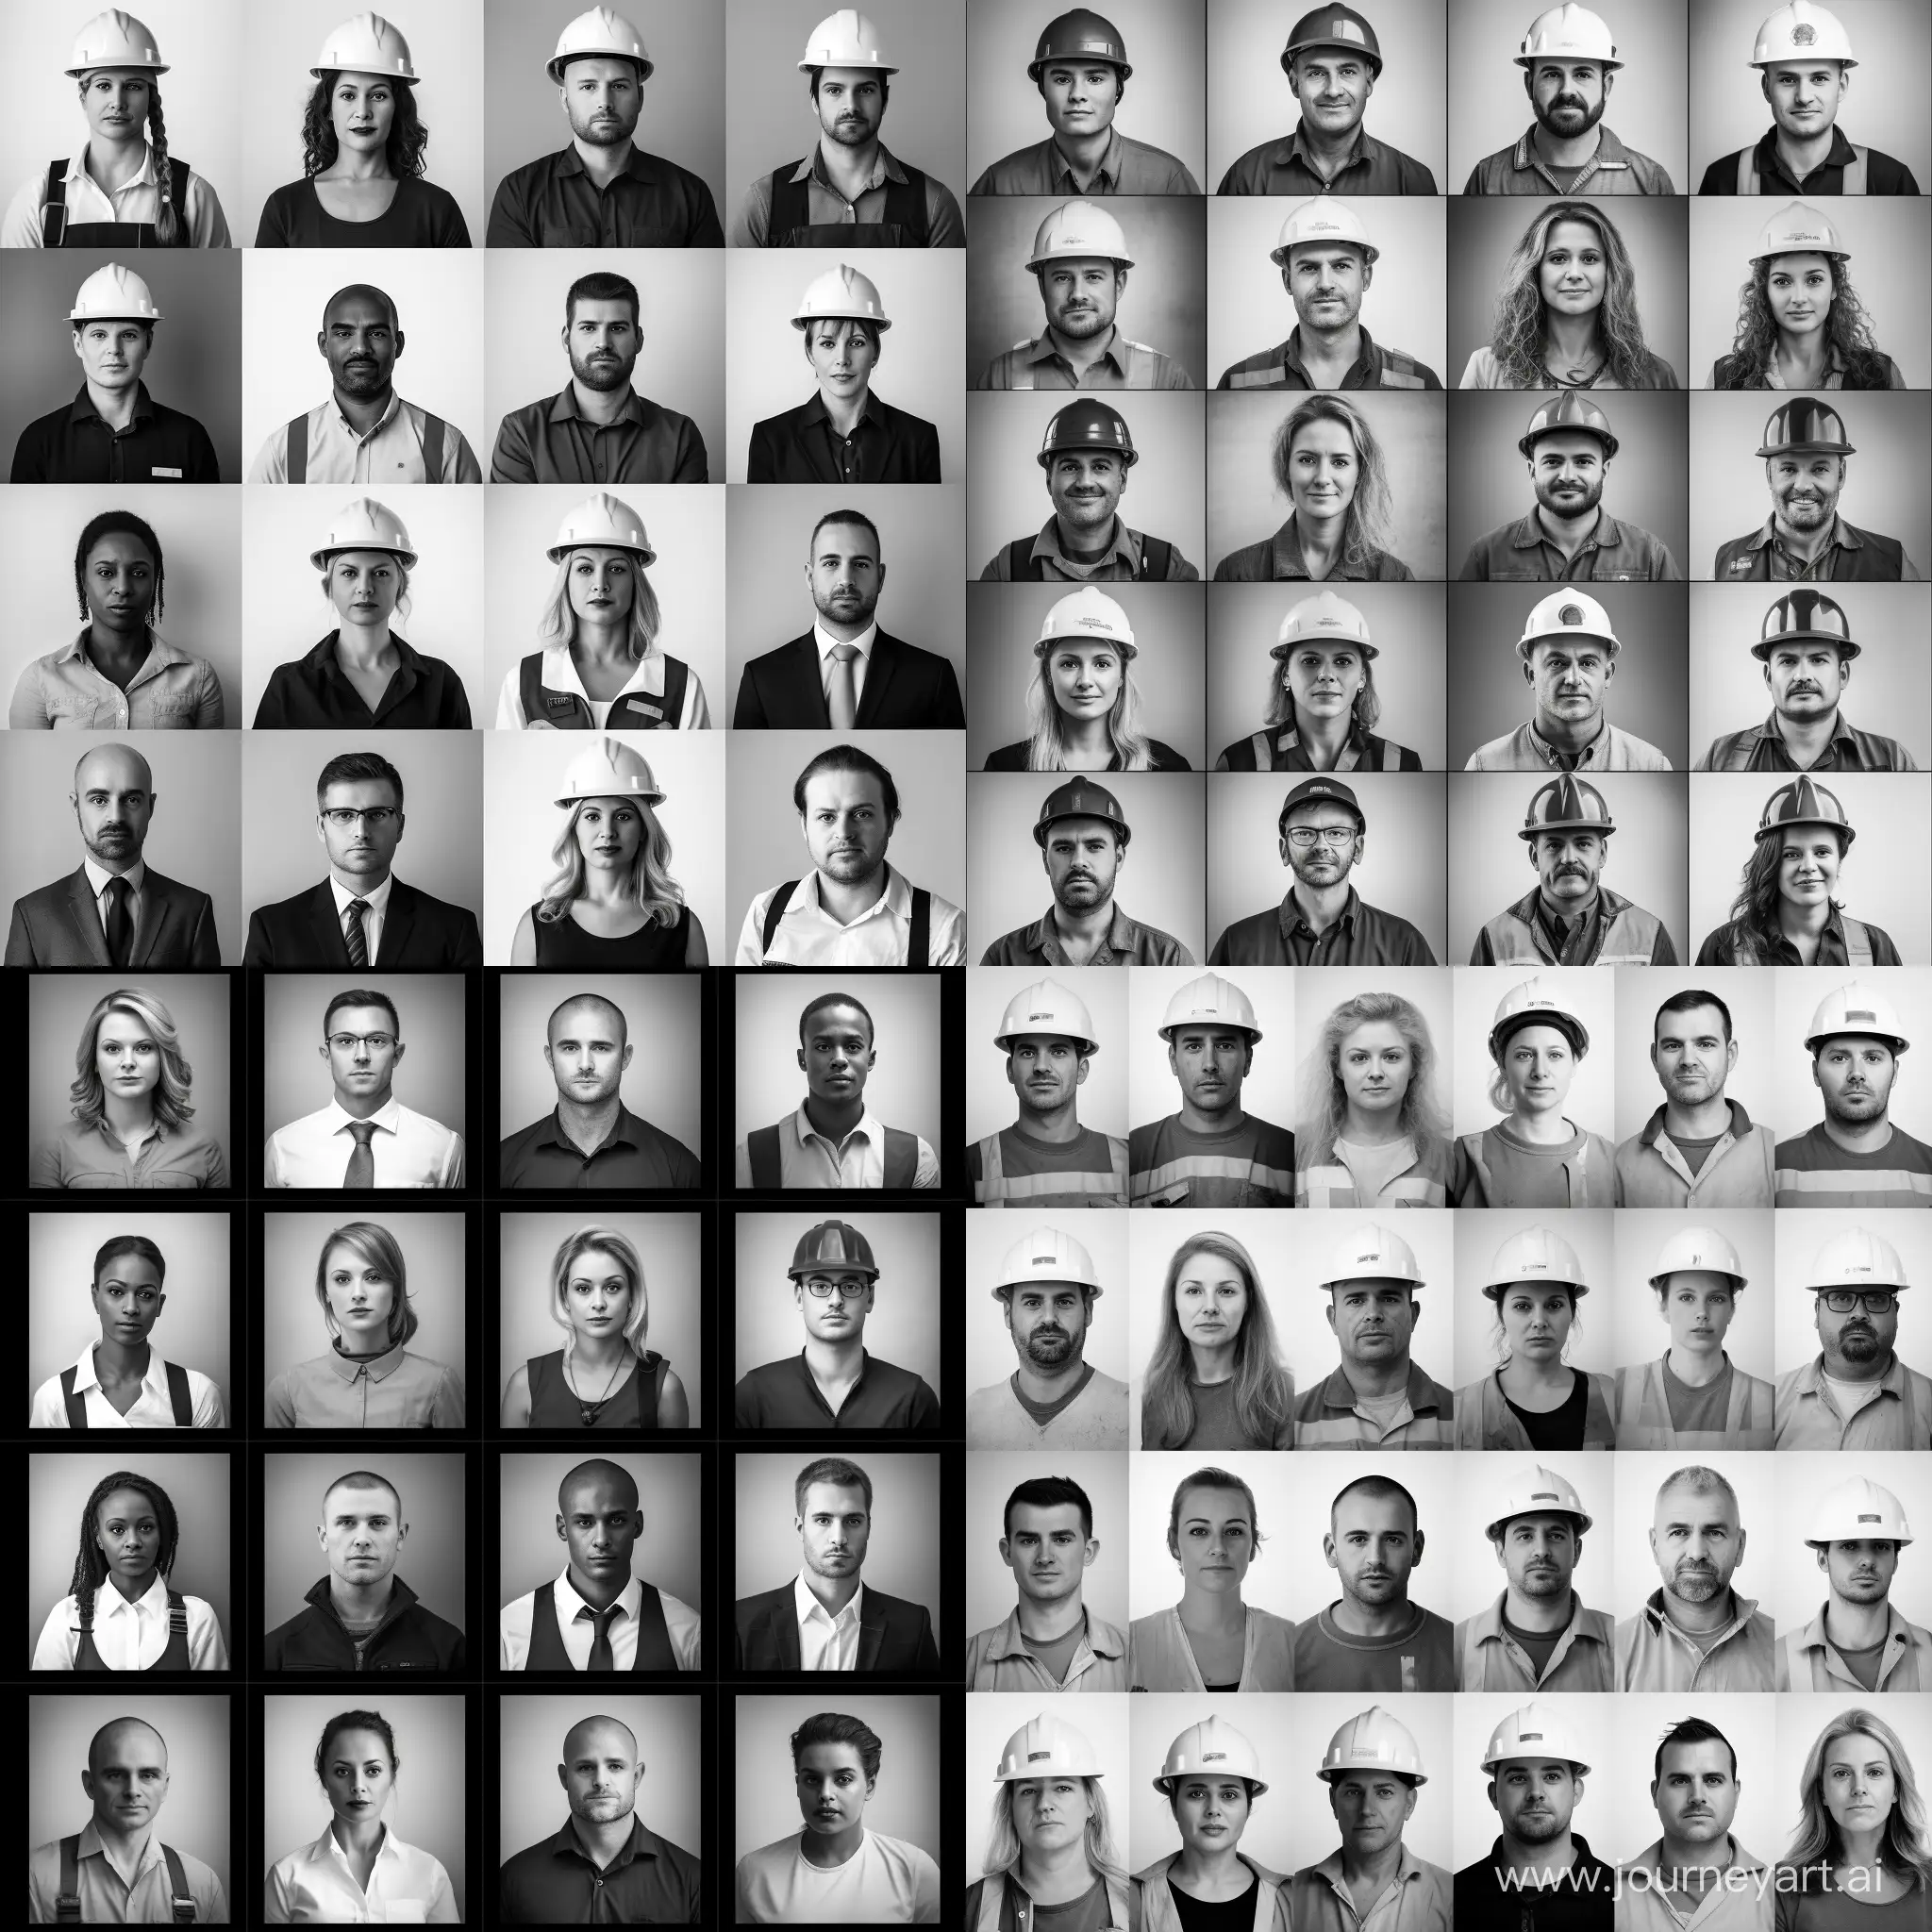 European-Construction-Company-Employees-Collage-in-Black-and-White